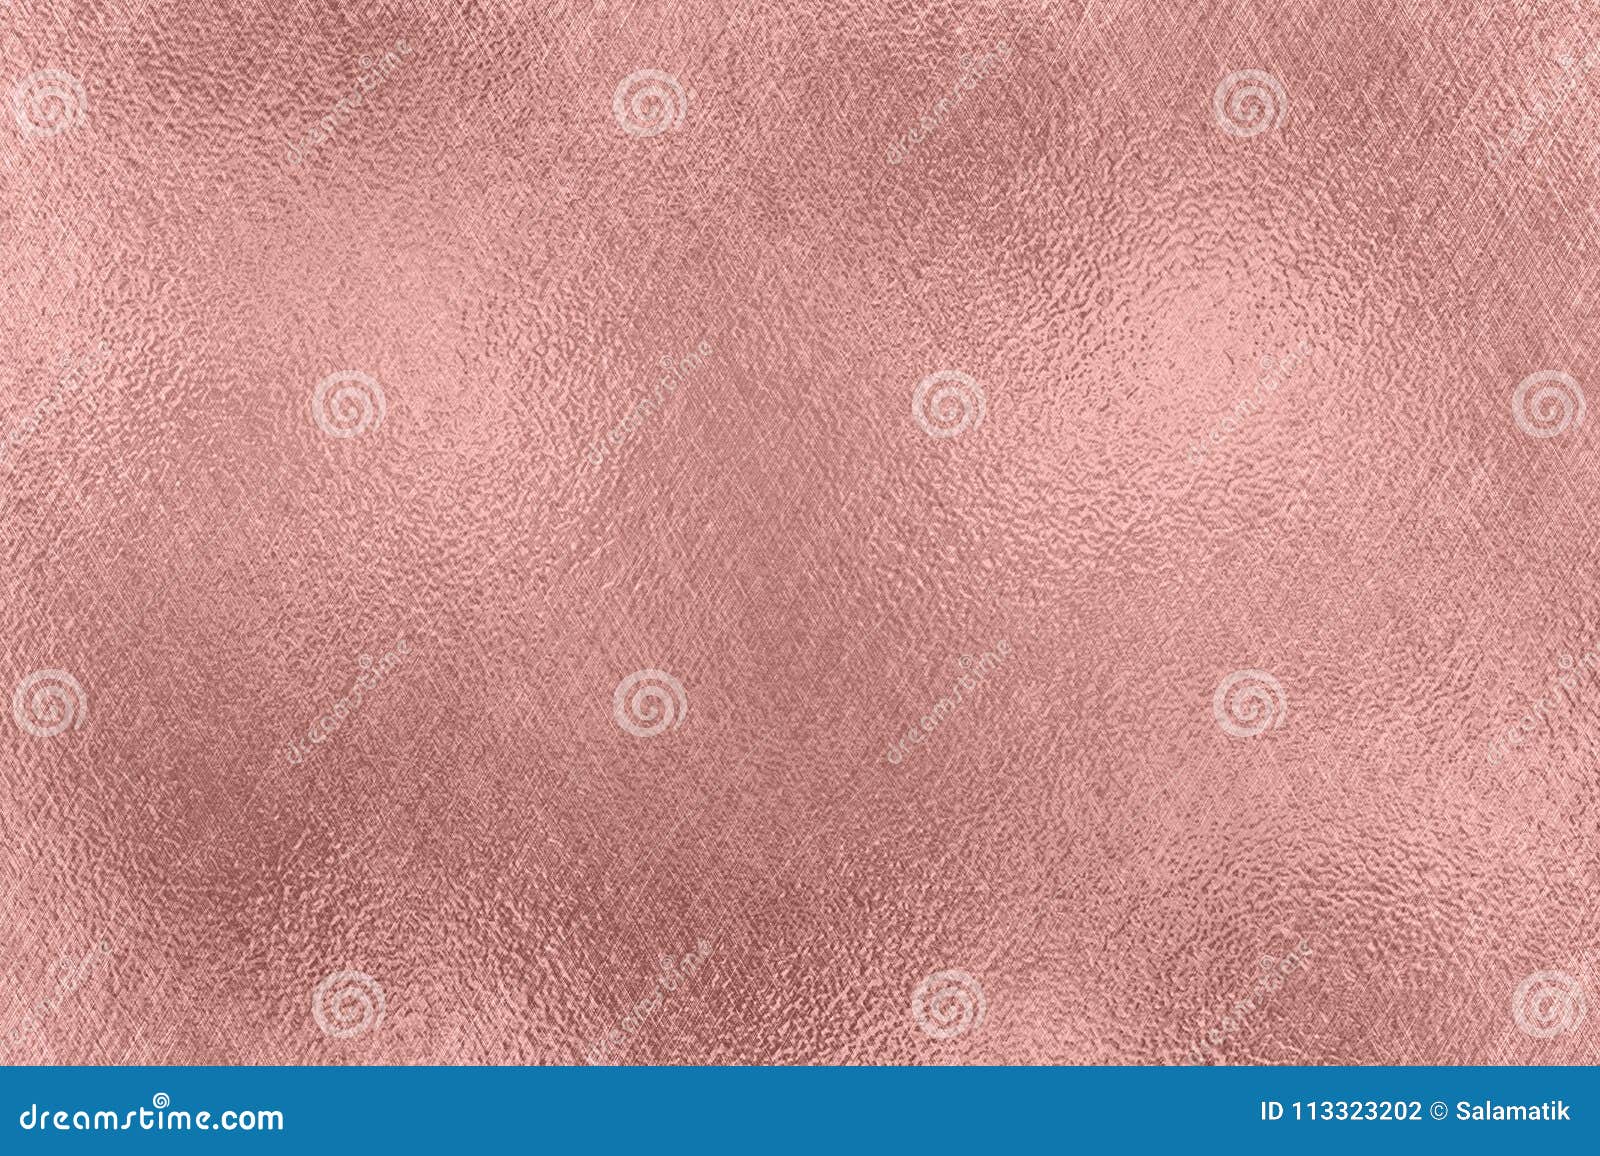 abstract background. rose gold foil texture.